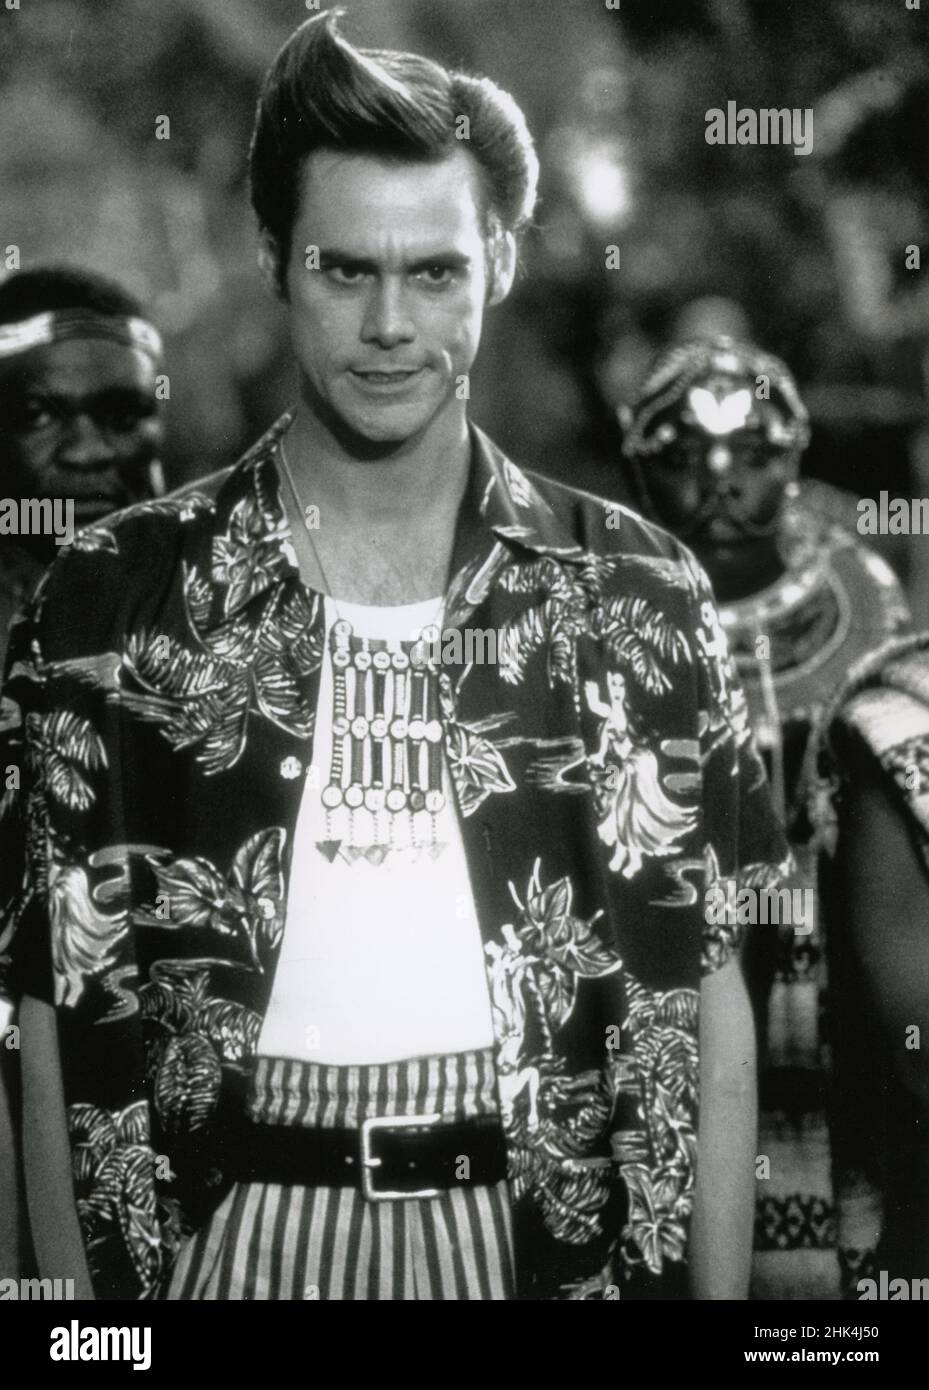 American actor Jim Carrey in the movie Ace Ventura When Nature Calls, USA 1995 Stock Photo